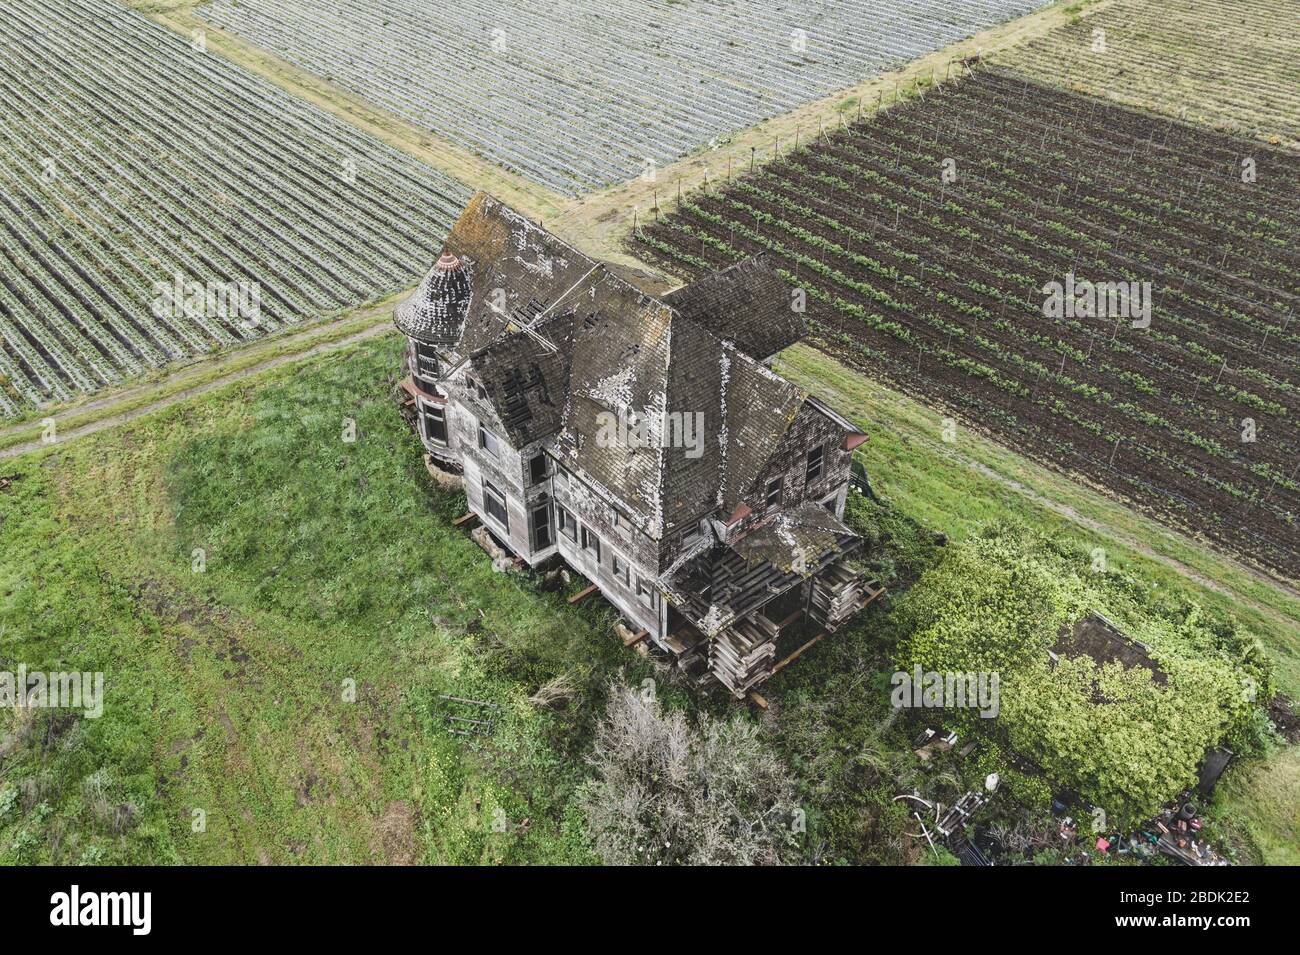 An Abandoned Mansion in Central Farmland California Stock Photo